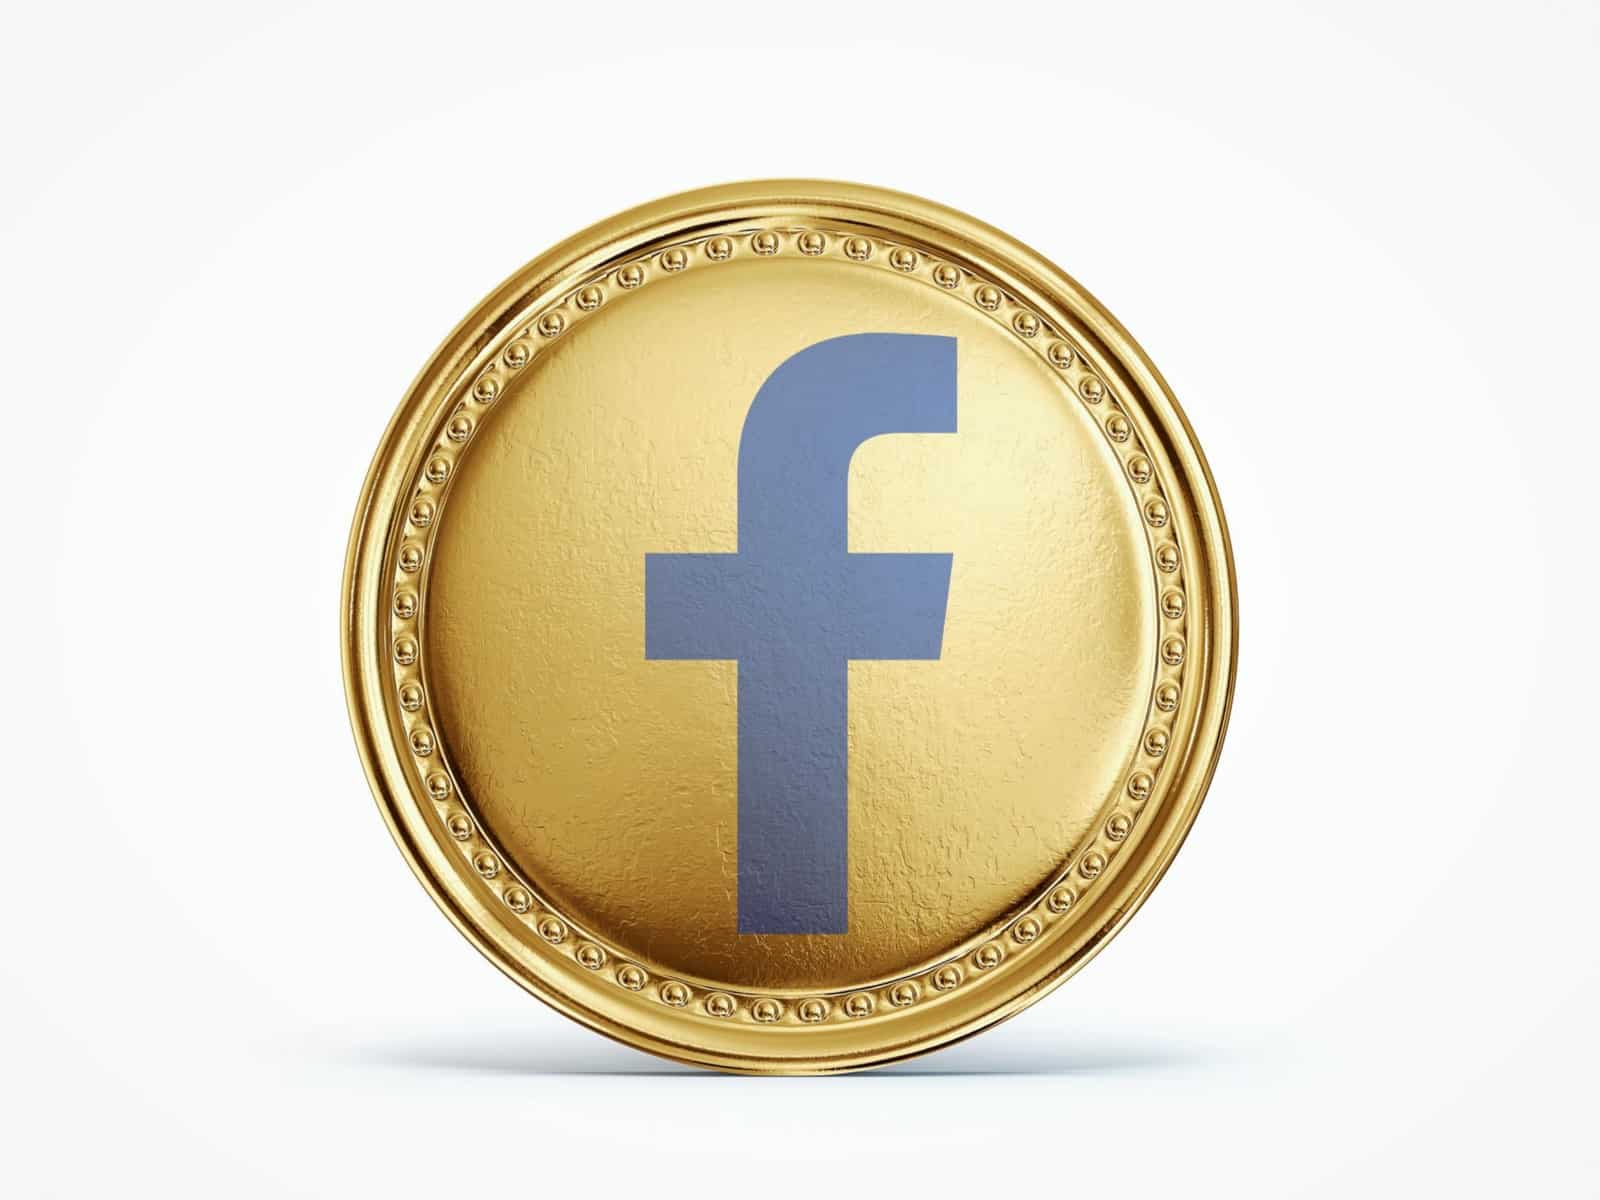 Facebook All Set to Launch Its Own Digital Currency by 2020